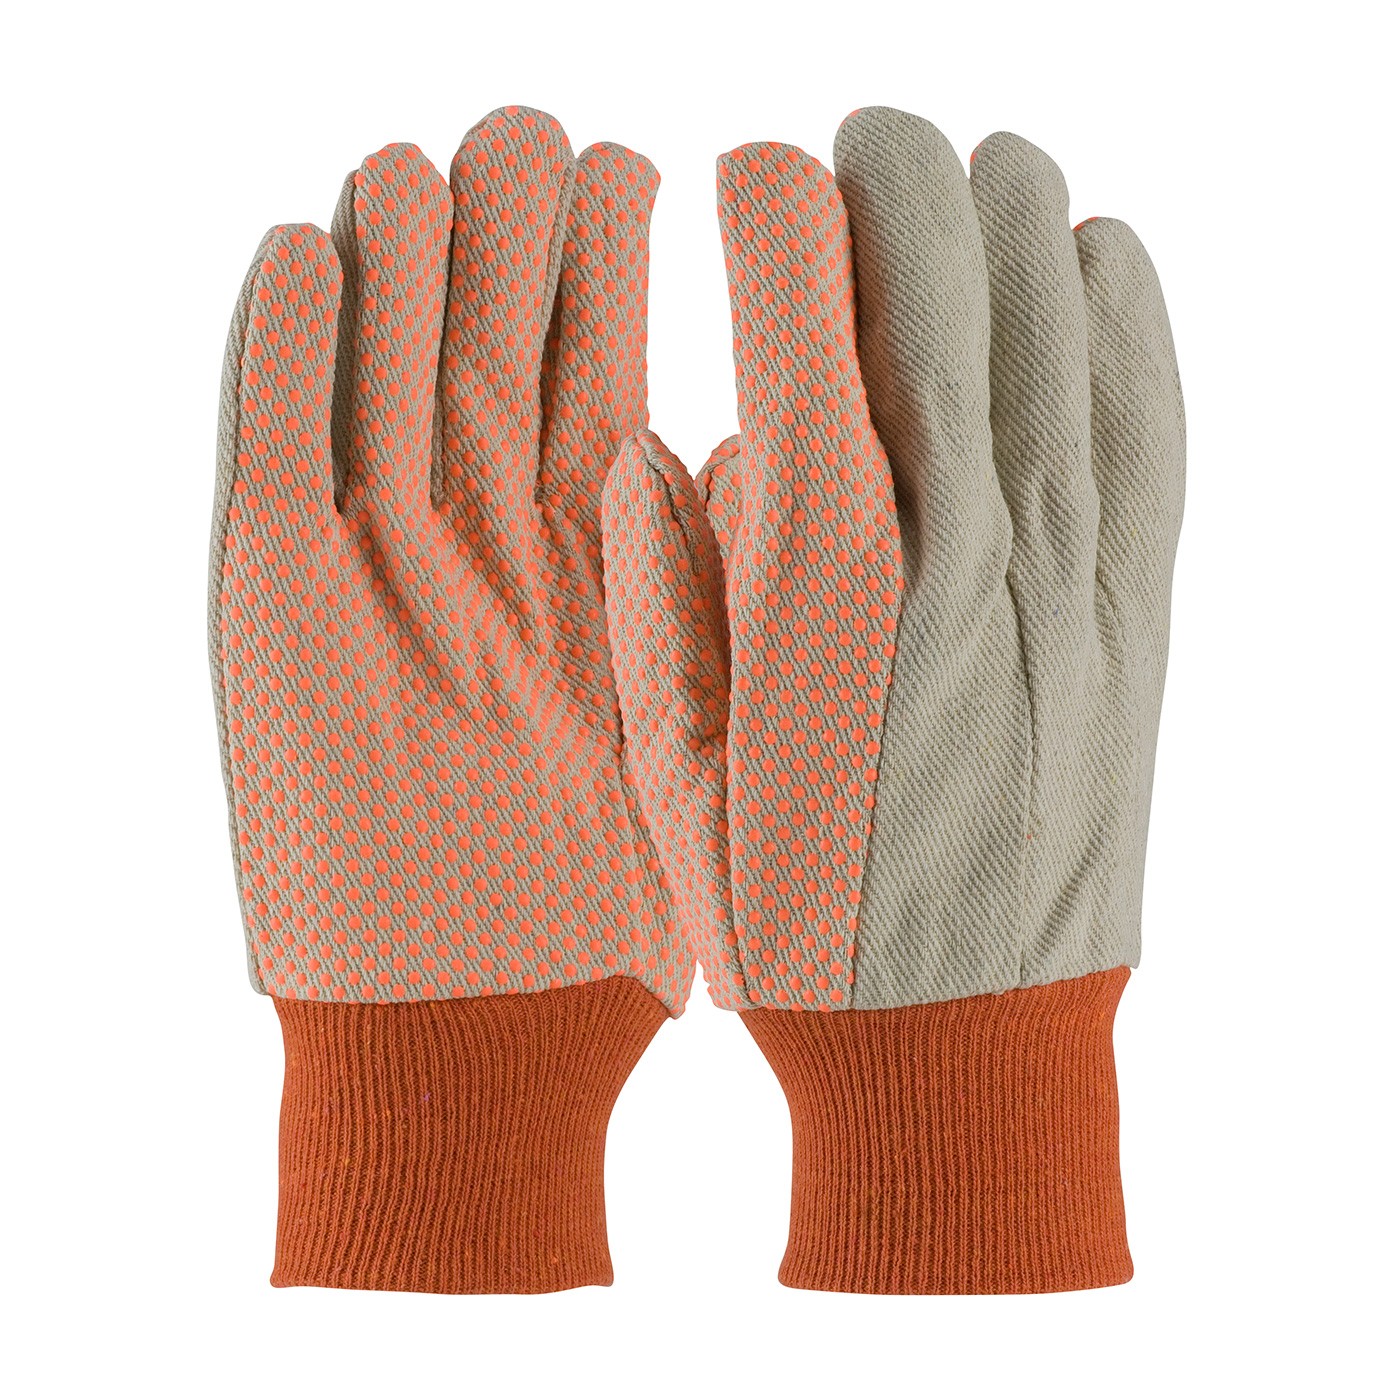 PIP® Premium Grade Cotton Canvas Glove with PVC Dotted Grip on Palm, Thumb and Index Finger - 10 oz.  (#91-910PDO)